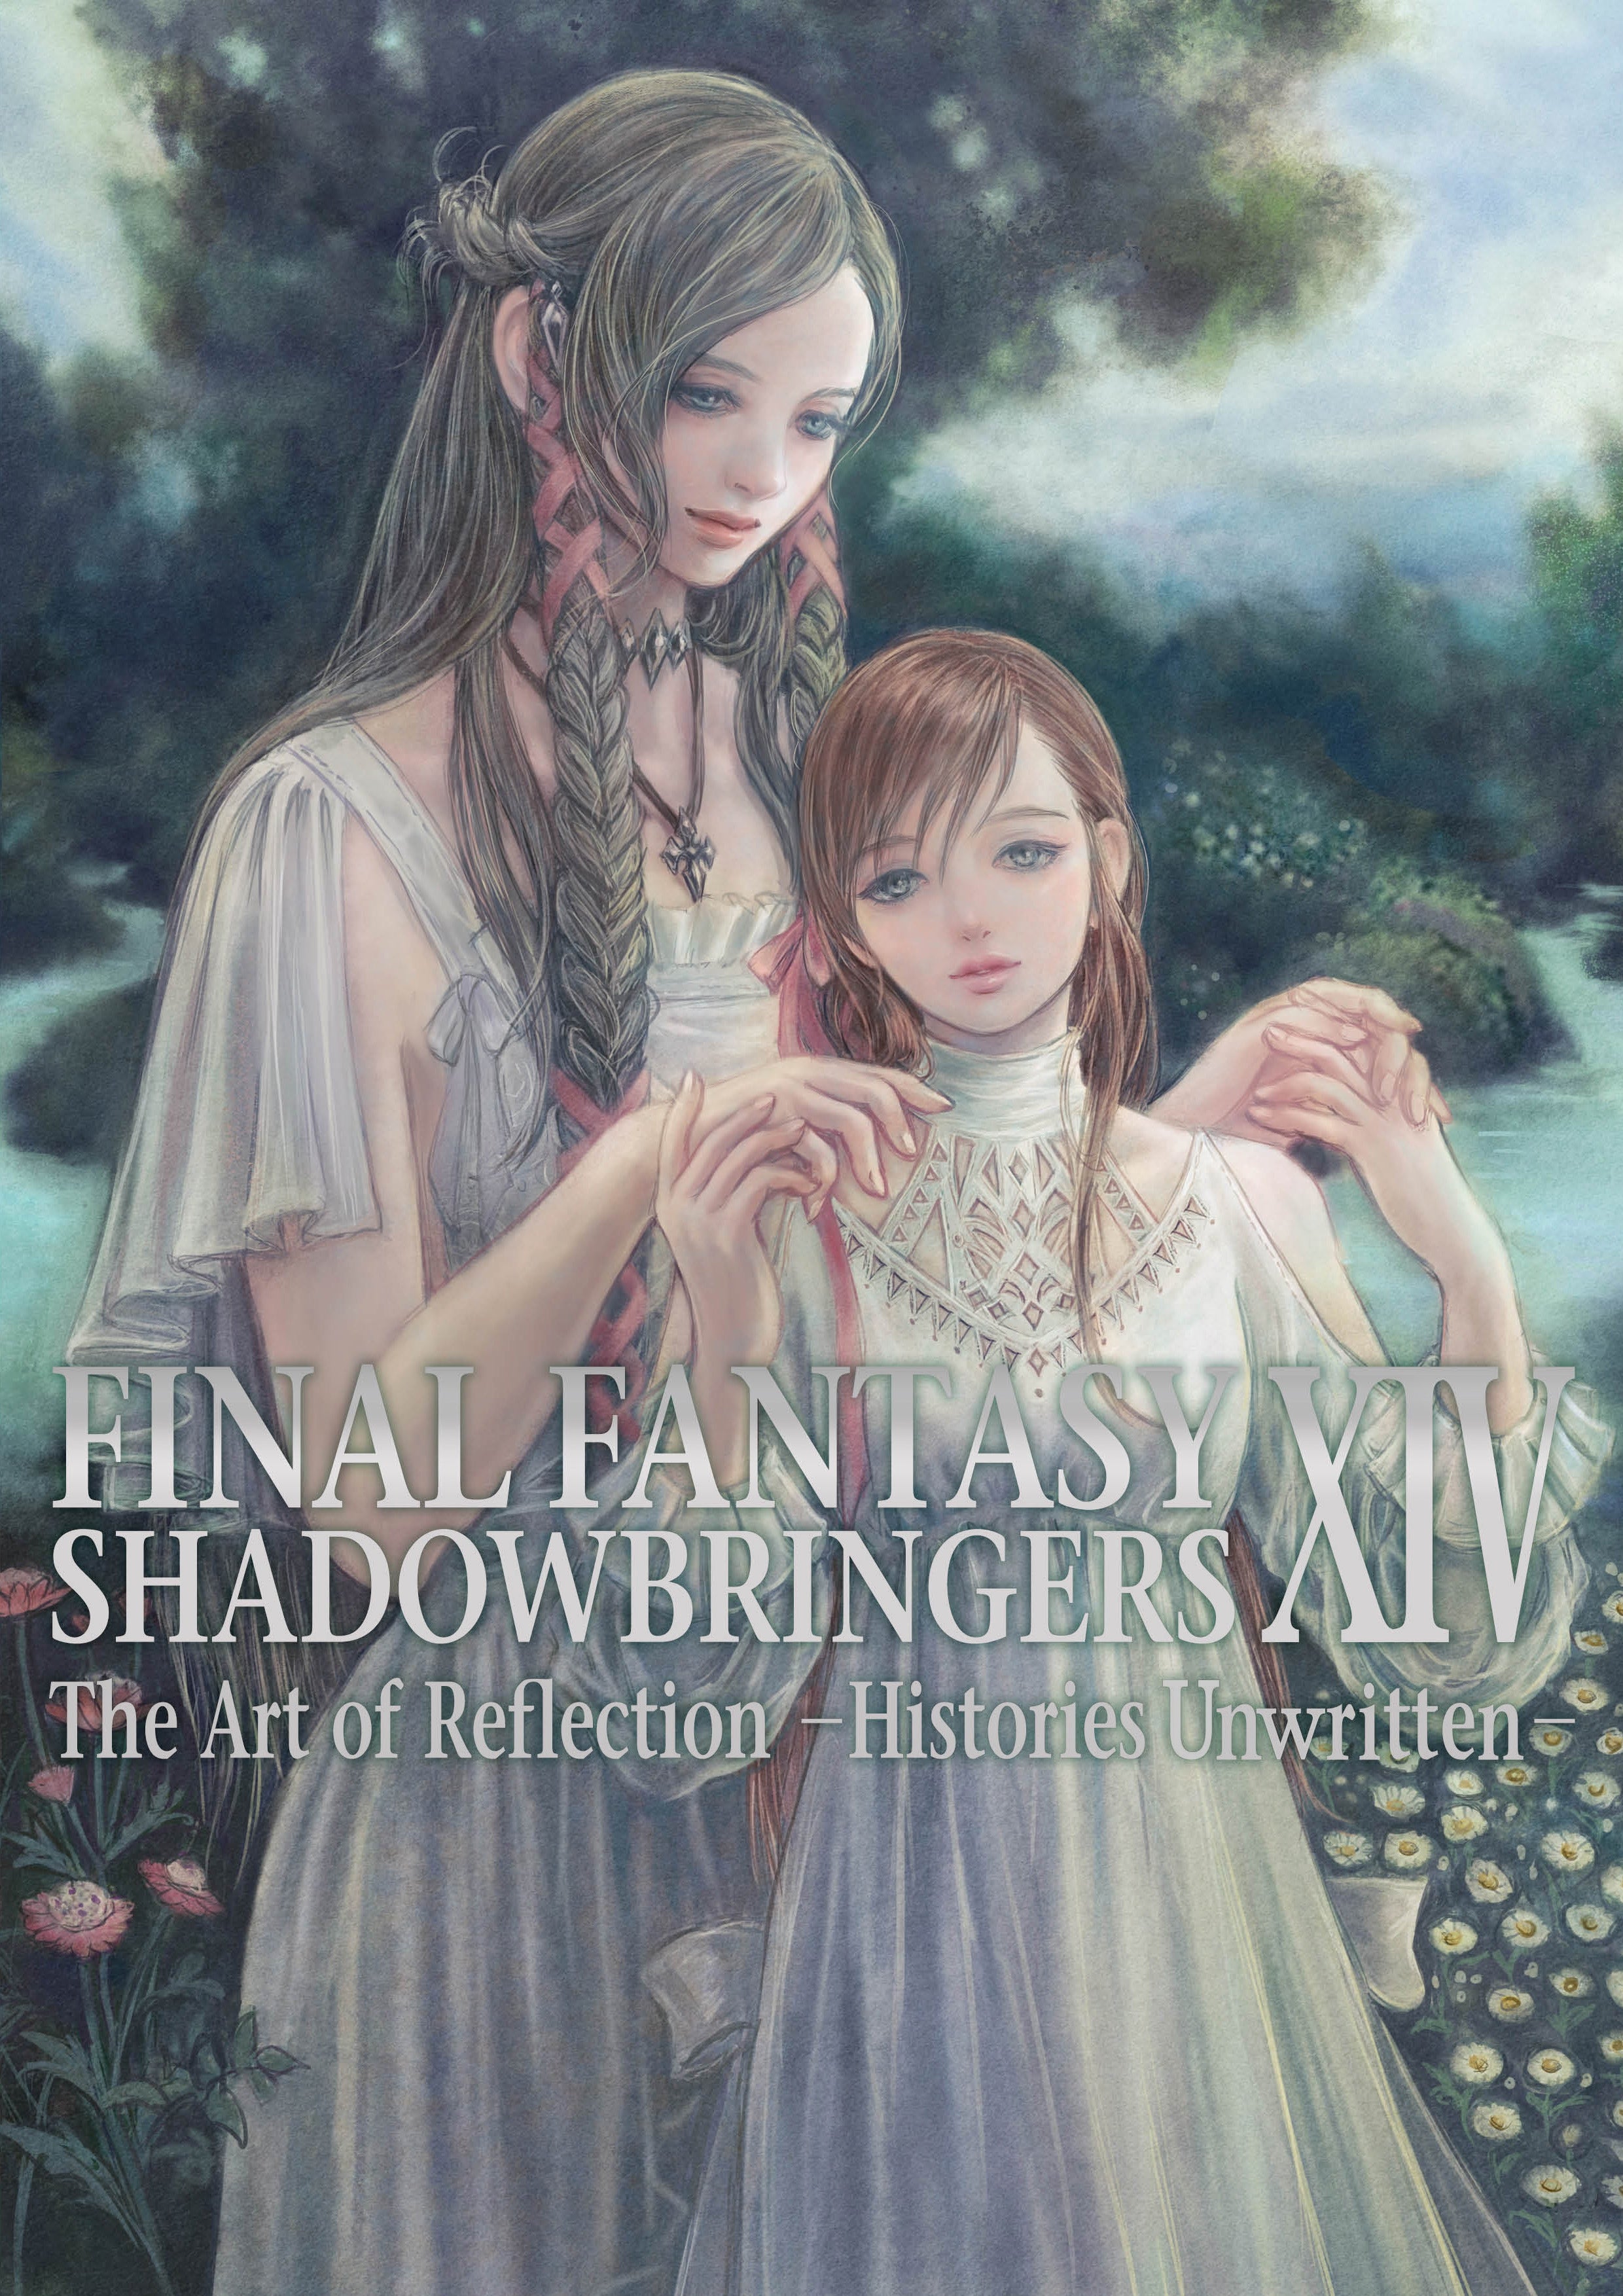 Final Fantasy XIV Shadowbringers -- The Art of Reflection -Histories Unwritten-